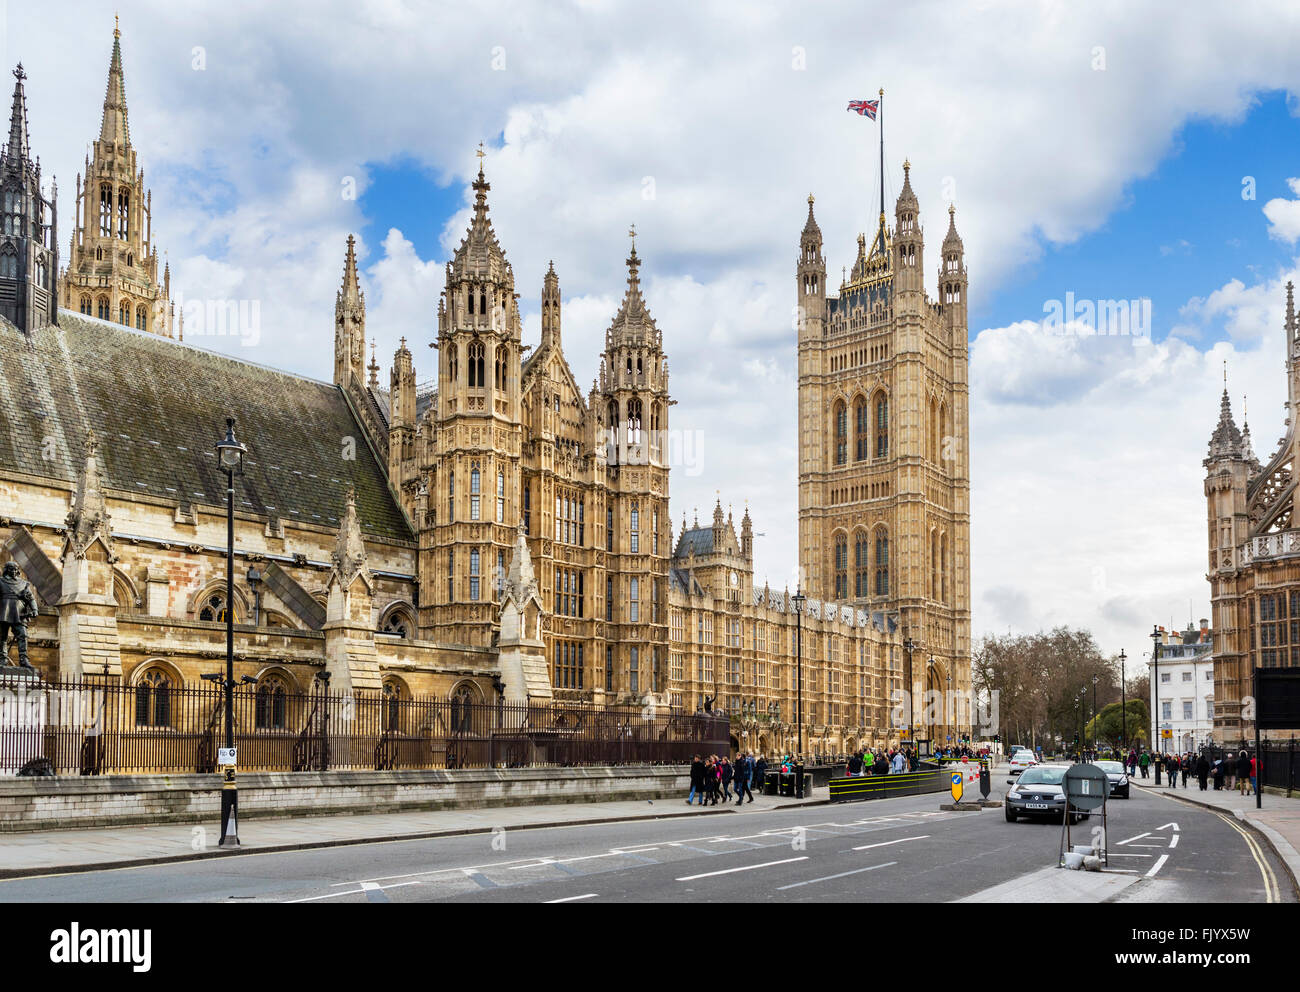 Palace of Westminster (Houses of Parliament) vom Parliament Square, Westminster, London, England, Vereinigtes Königreich Stockfoto